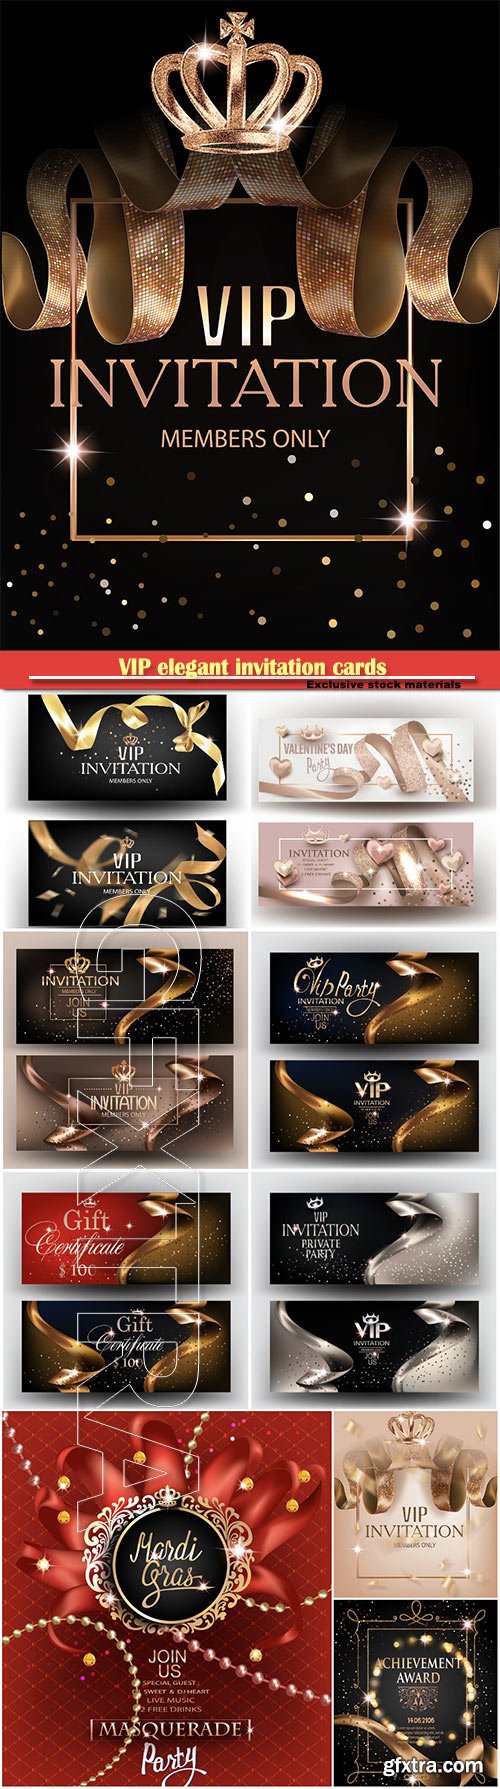 VIP elegant invitation cards with gold ribbons, pattern, crown and frame and gold dust